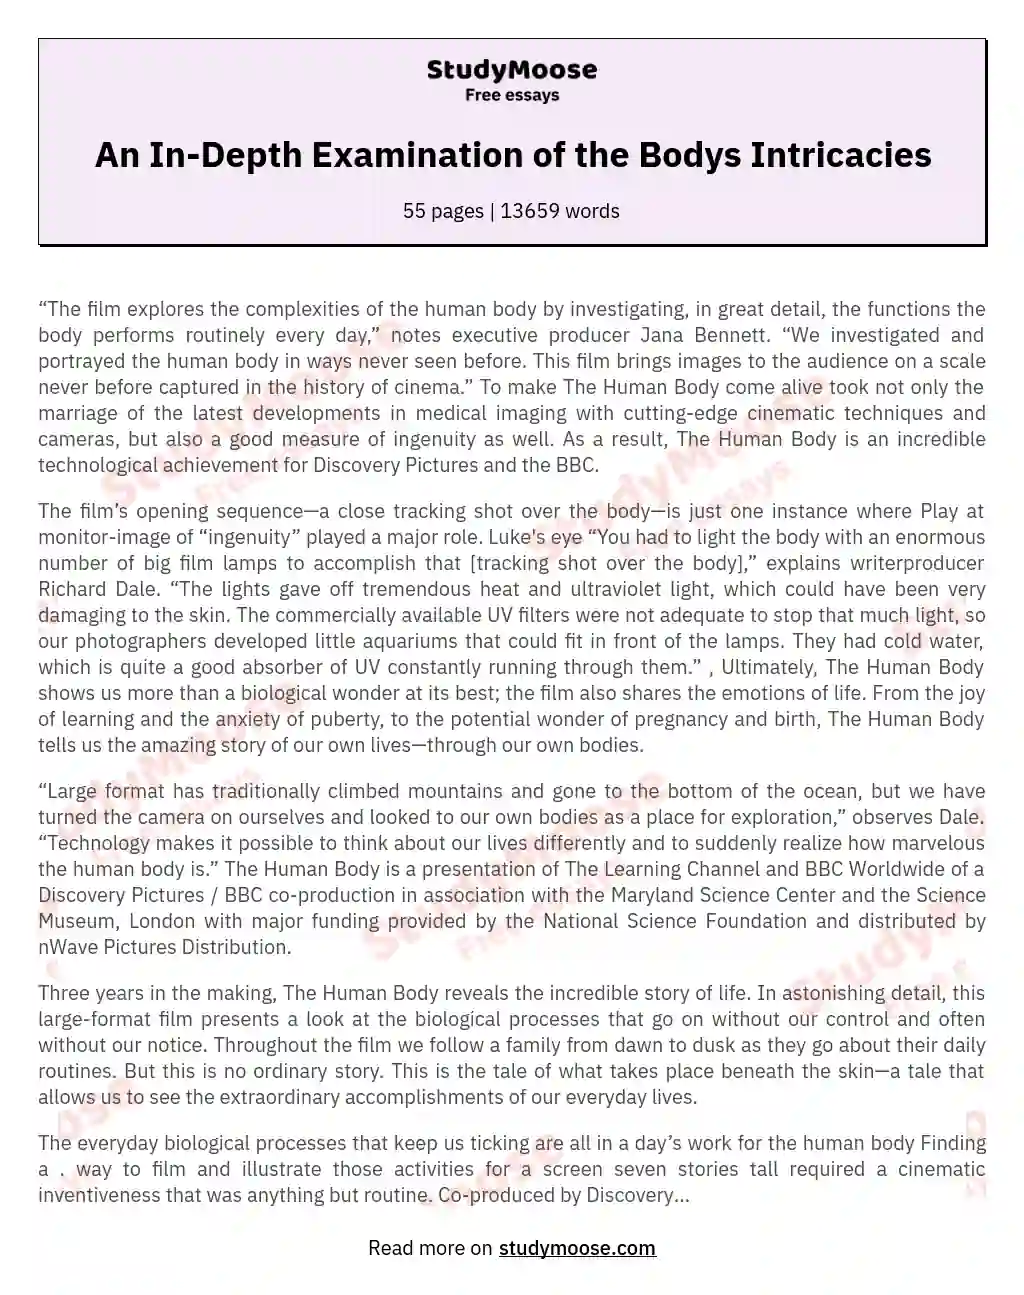 An In-Depth Examination of the Bodys Intricacies essay